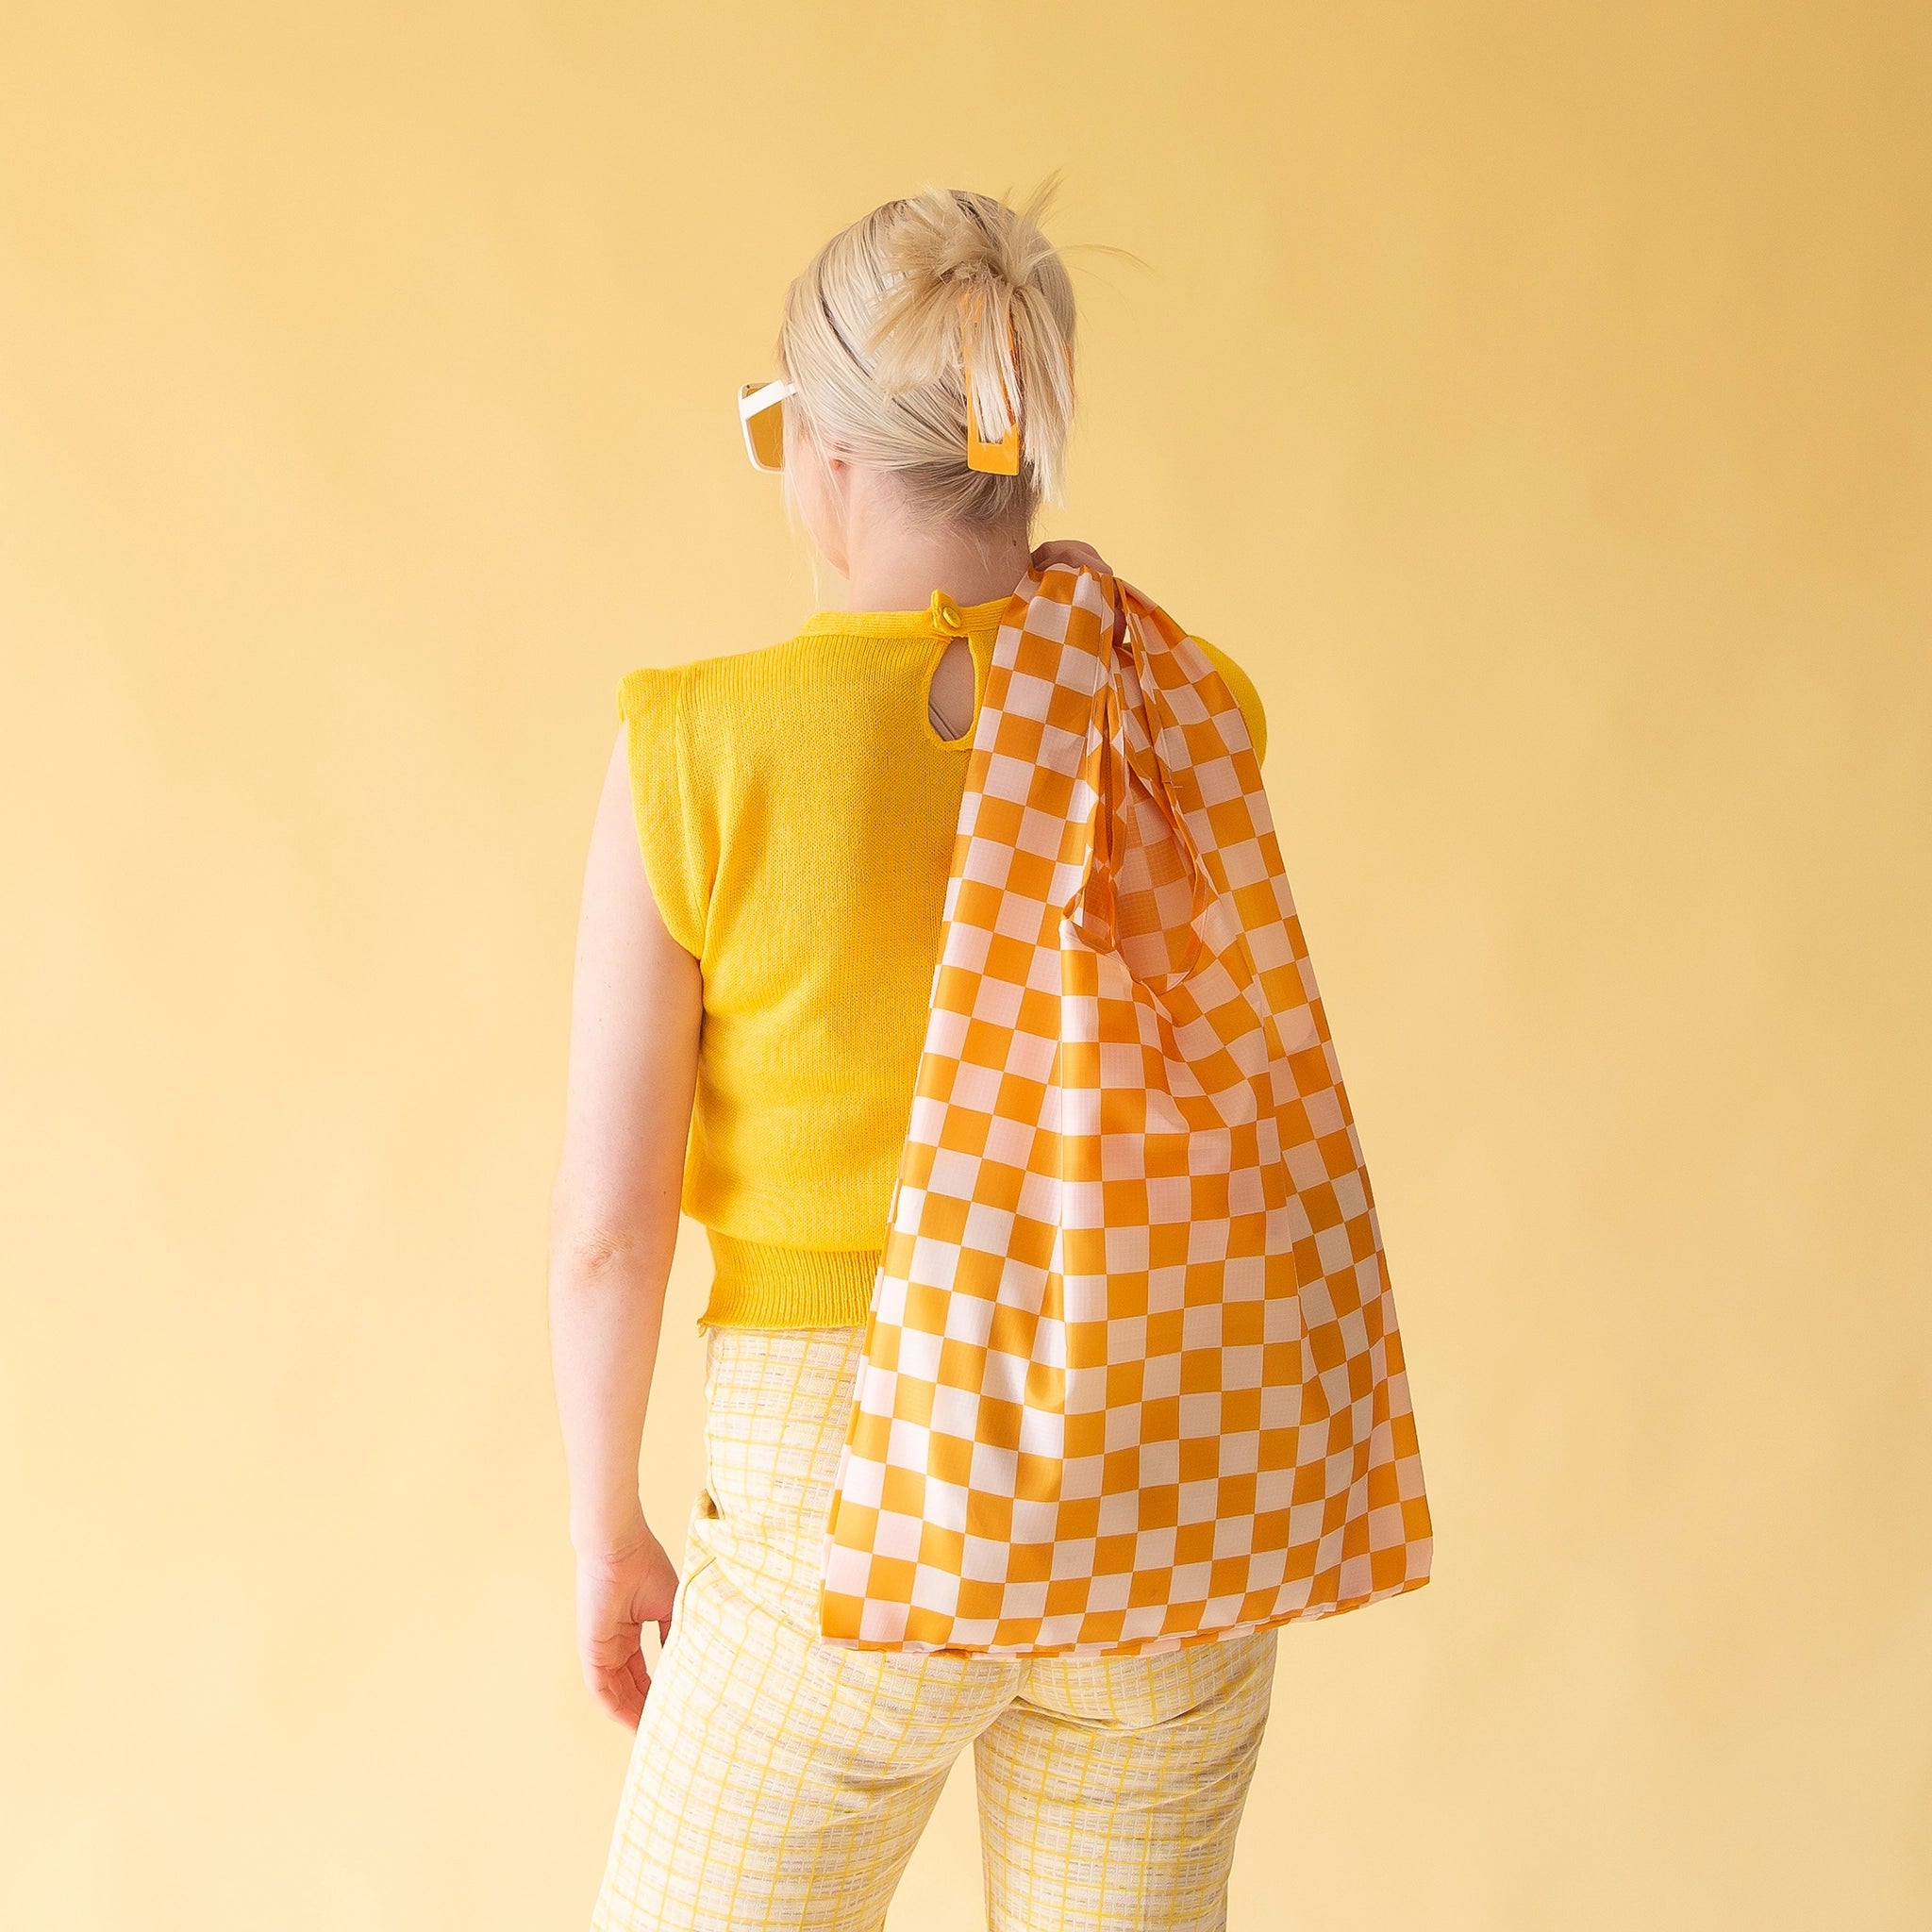 On a light yellow background is a model holding the light orange and ivory checkered printed nylon bag over their shoulder.